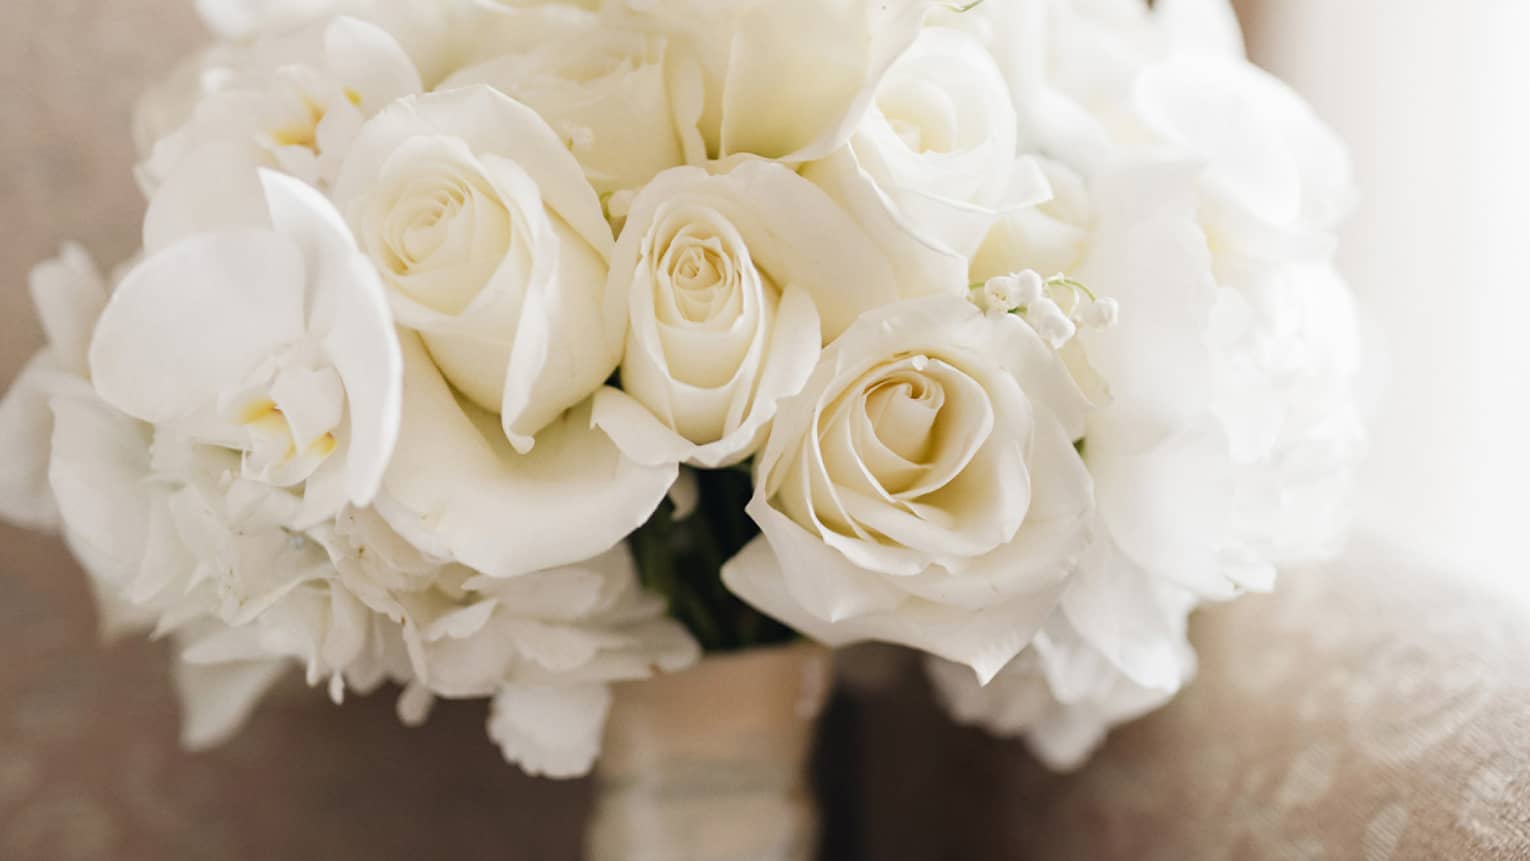 Bouquet of white roses rests against arm of sofa